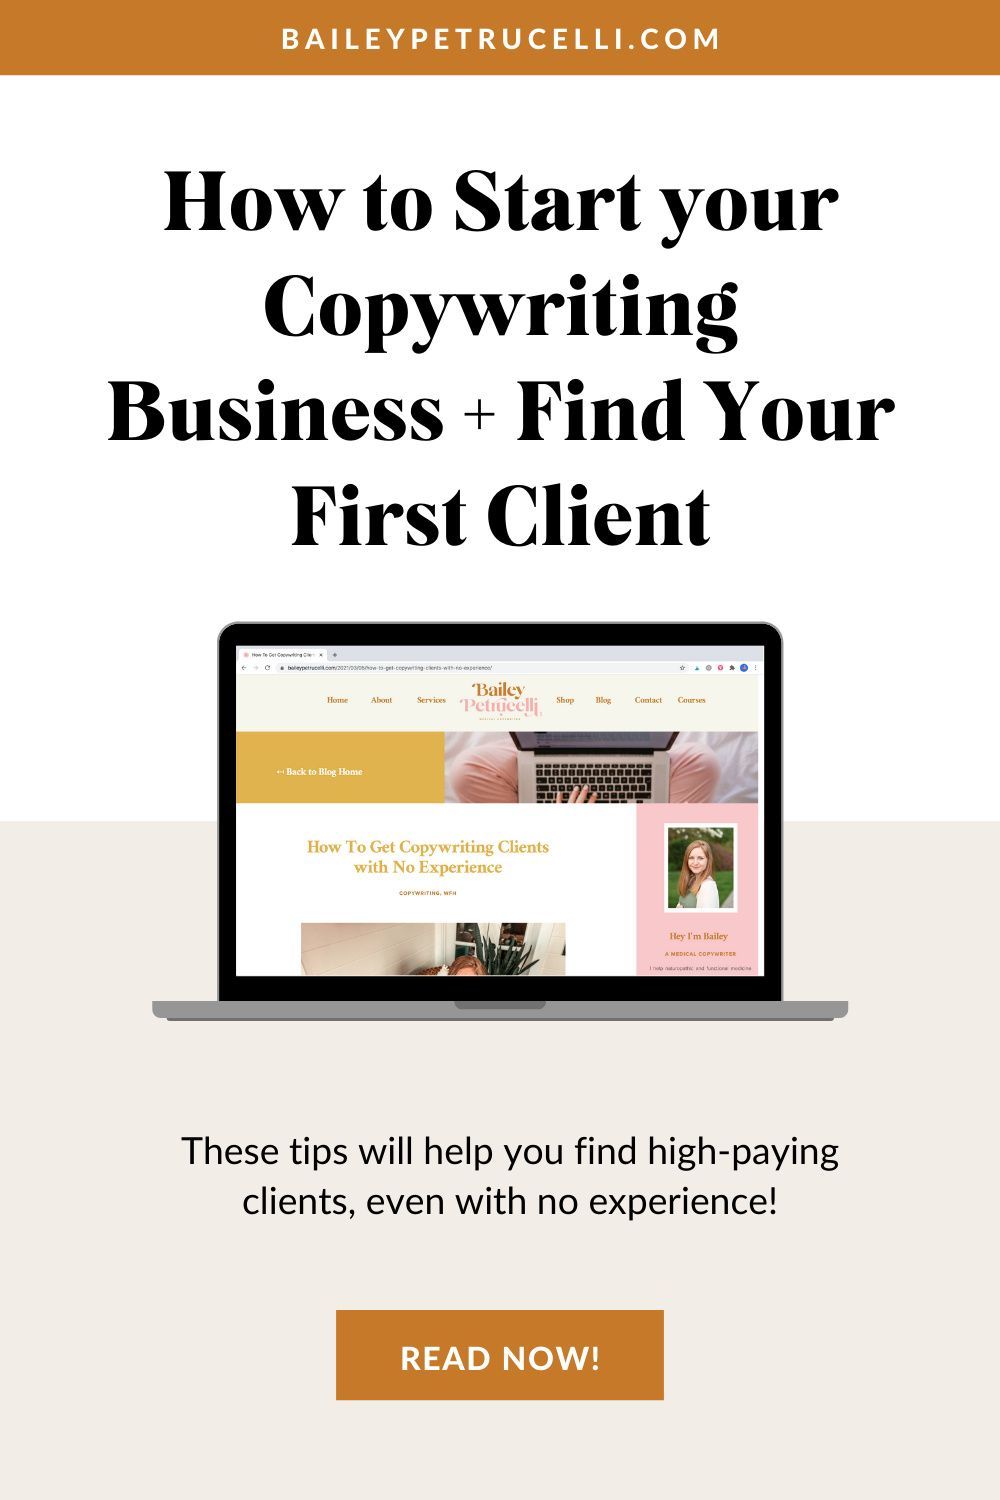 How To Get Copywriting Clients with No Experience | baileypetrucelli